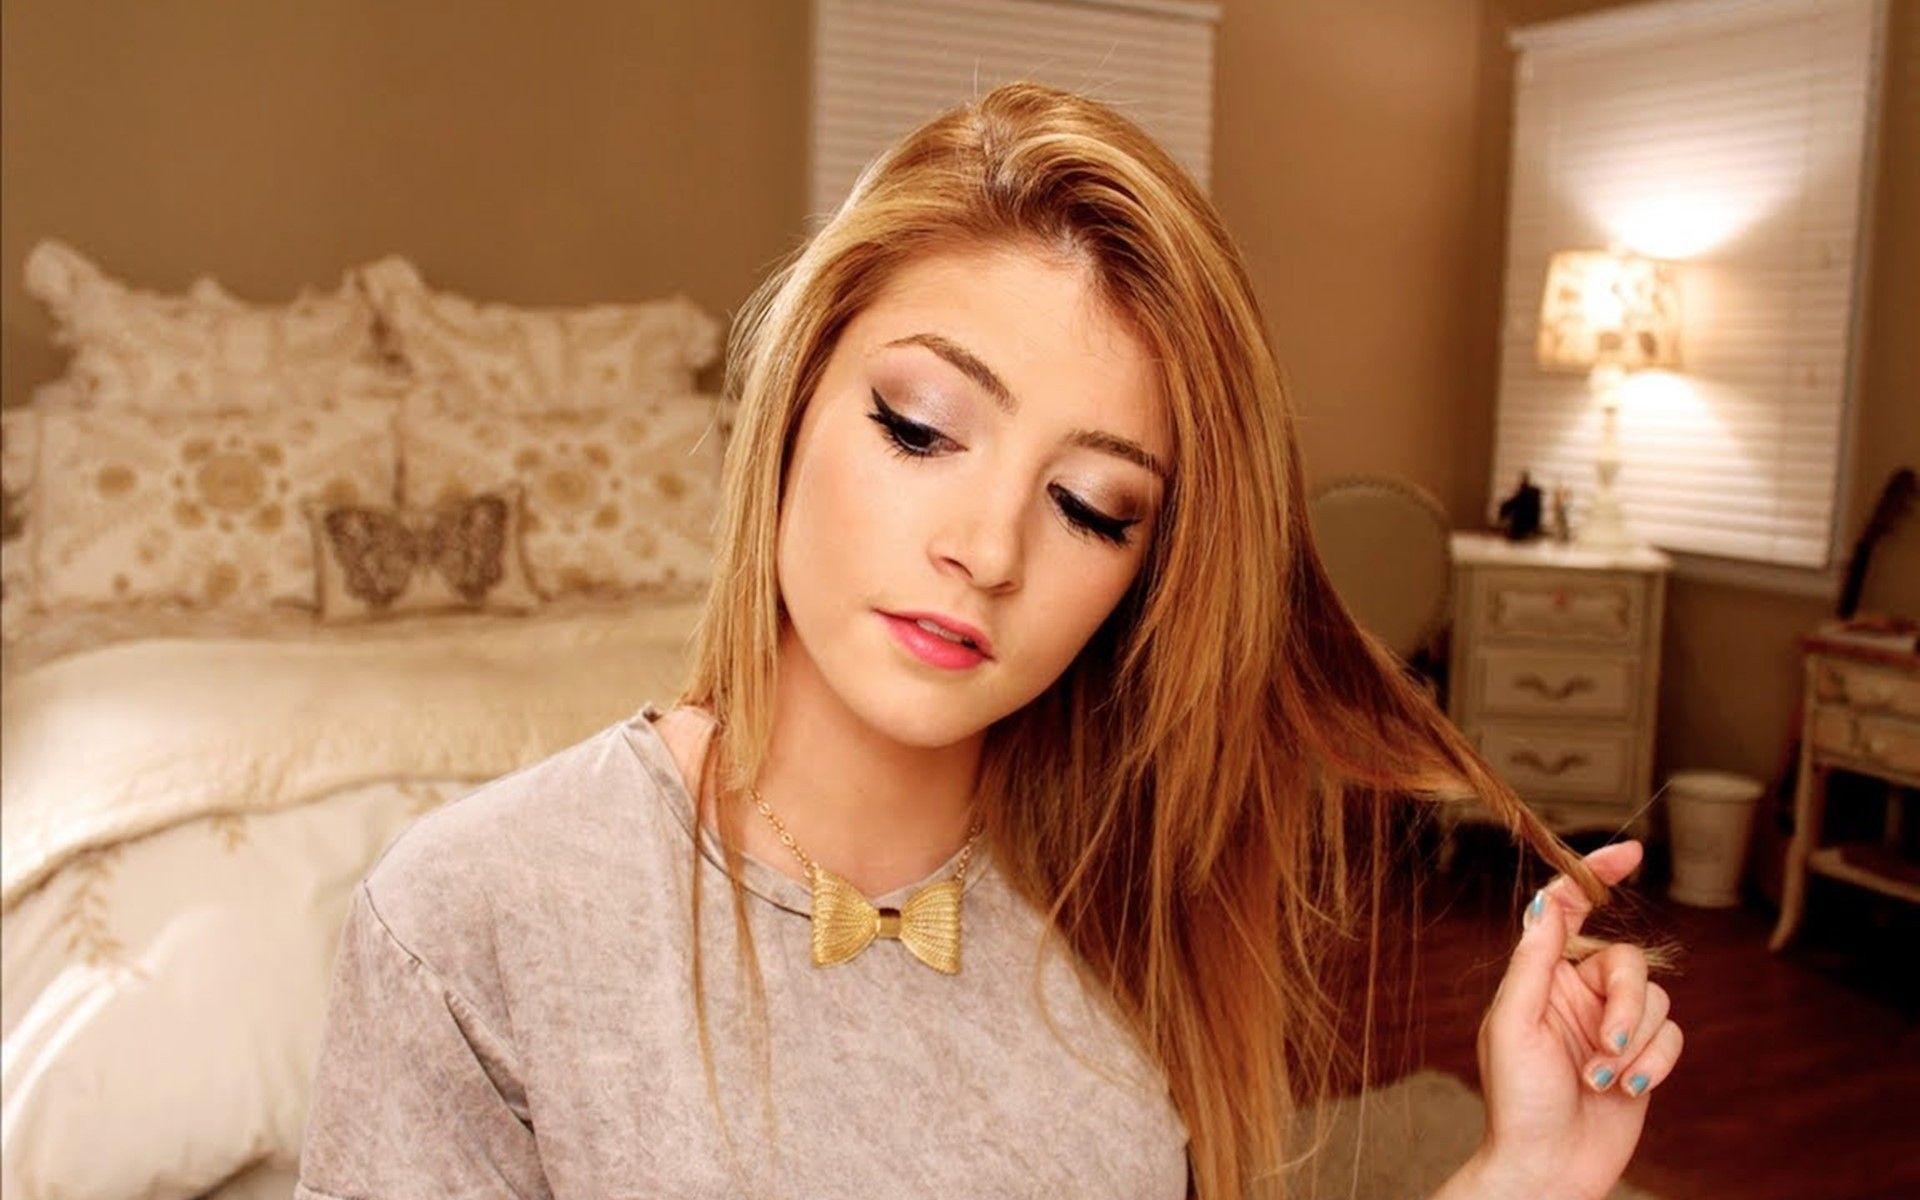 Stunning Chrissy Costanza musican young wallpapers by kyouko.